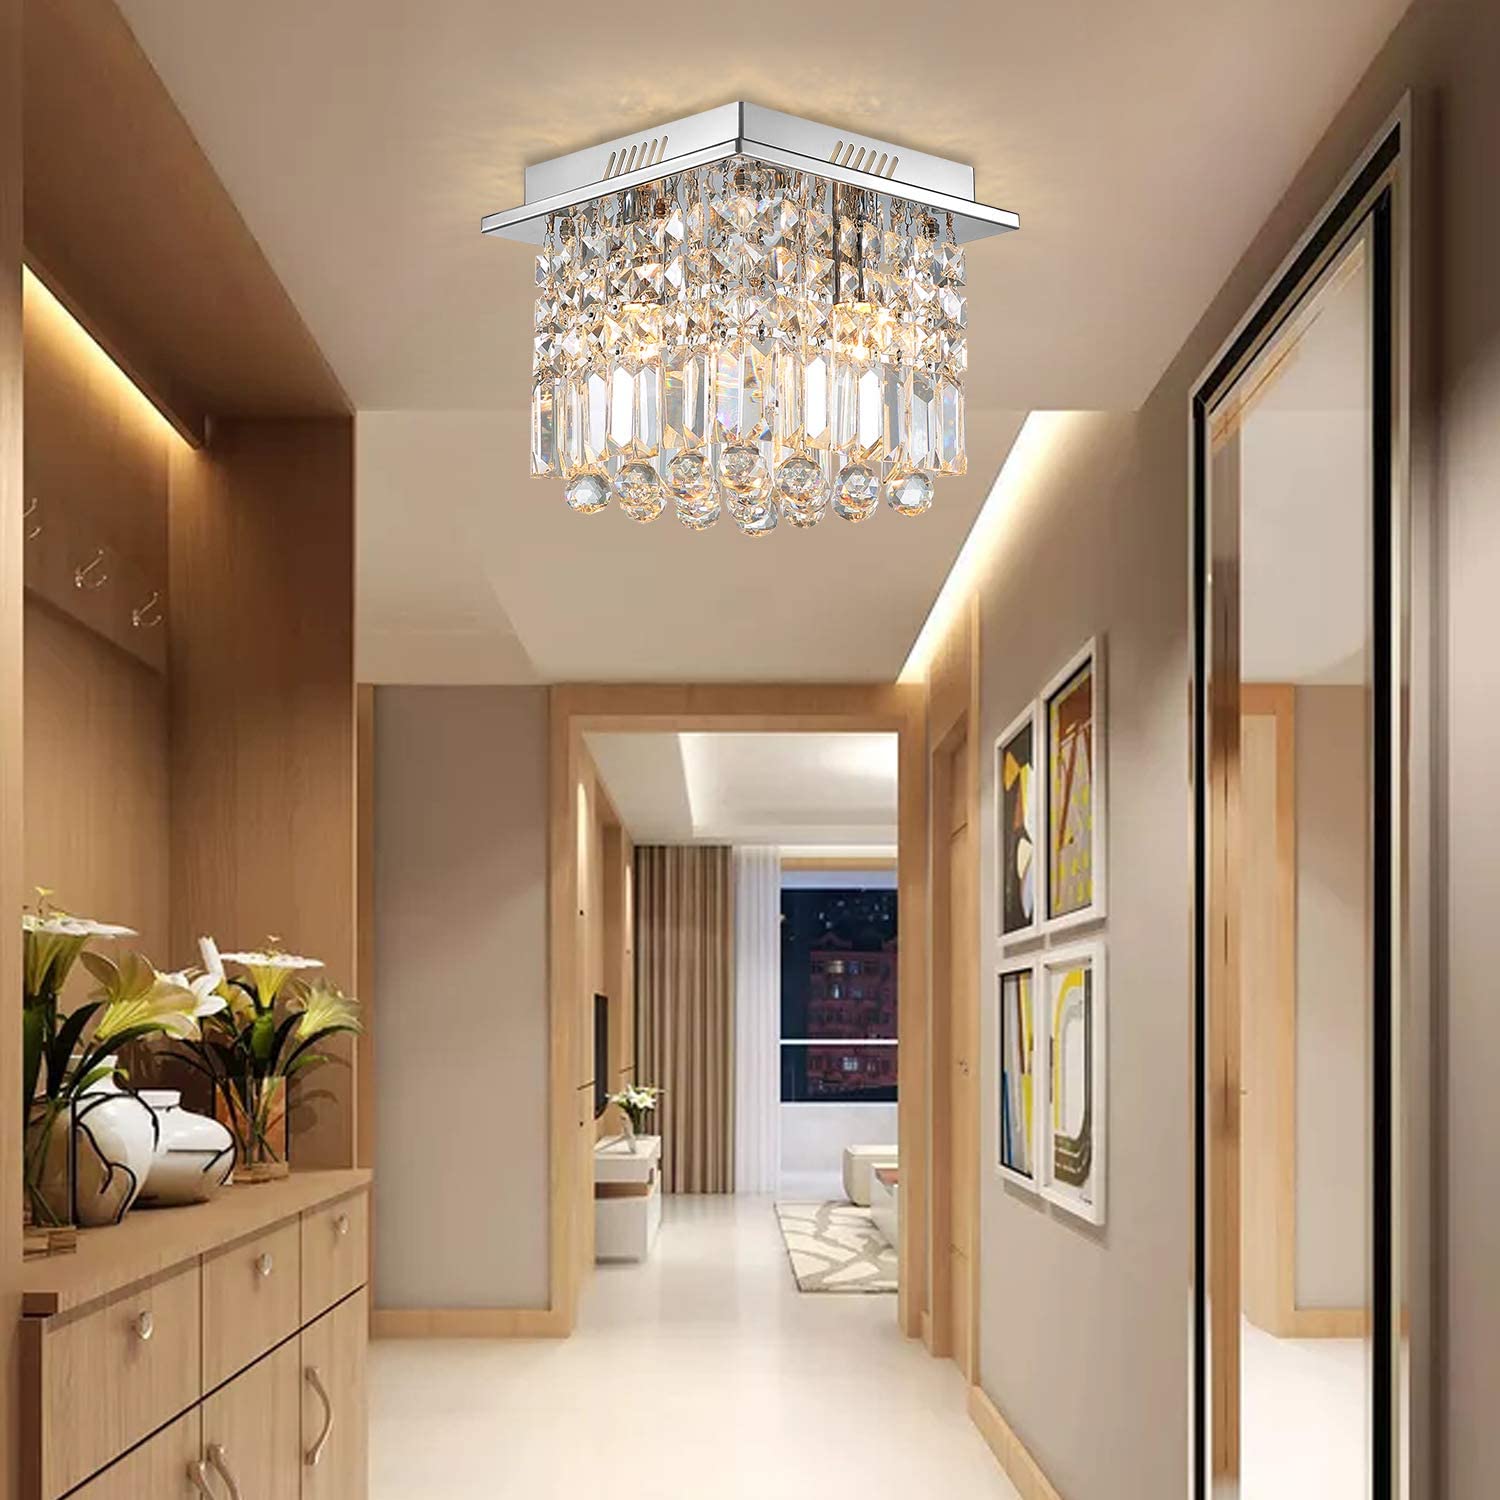 Small Square Hallway Crystal Chandelier - Ceiling Light